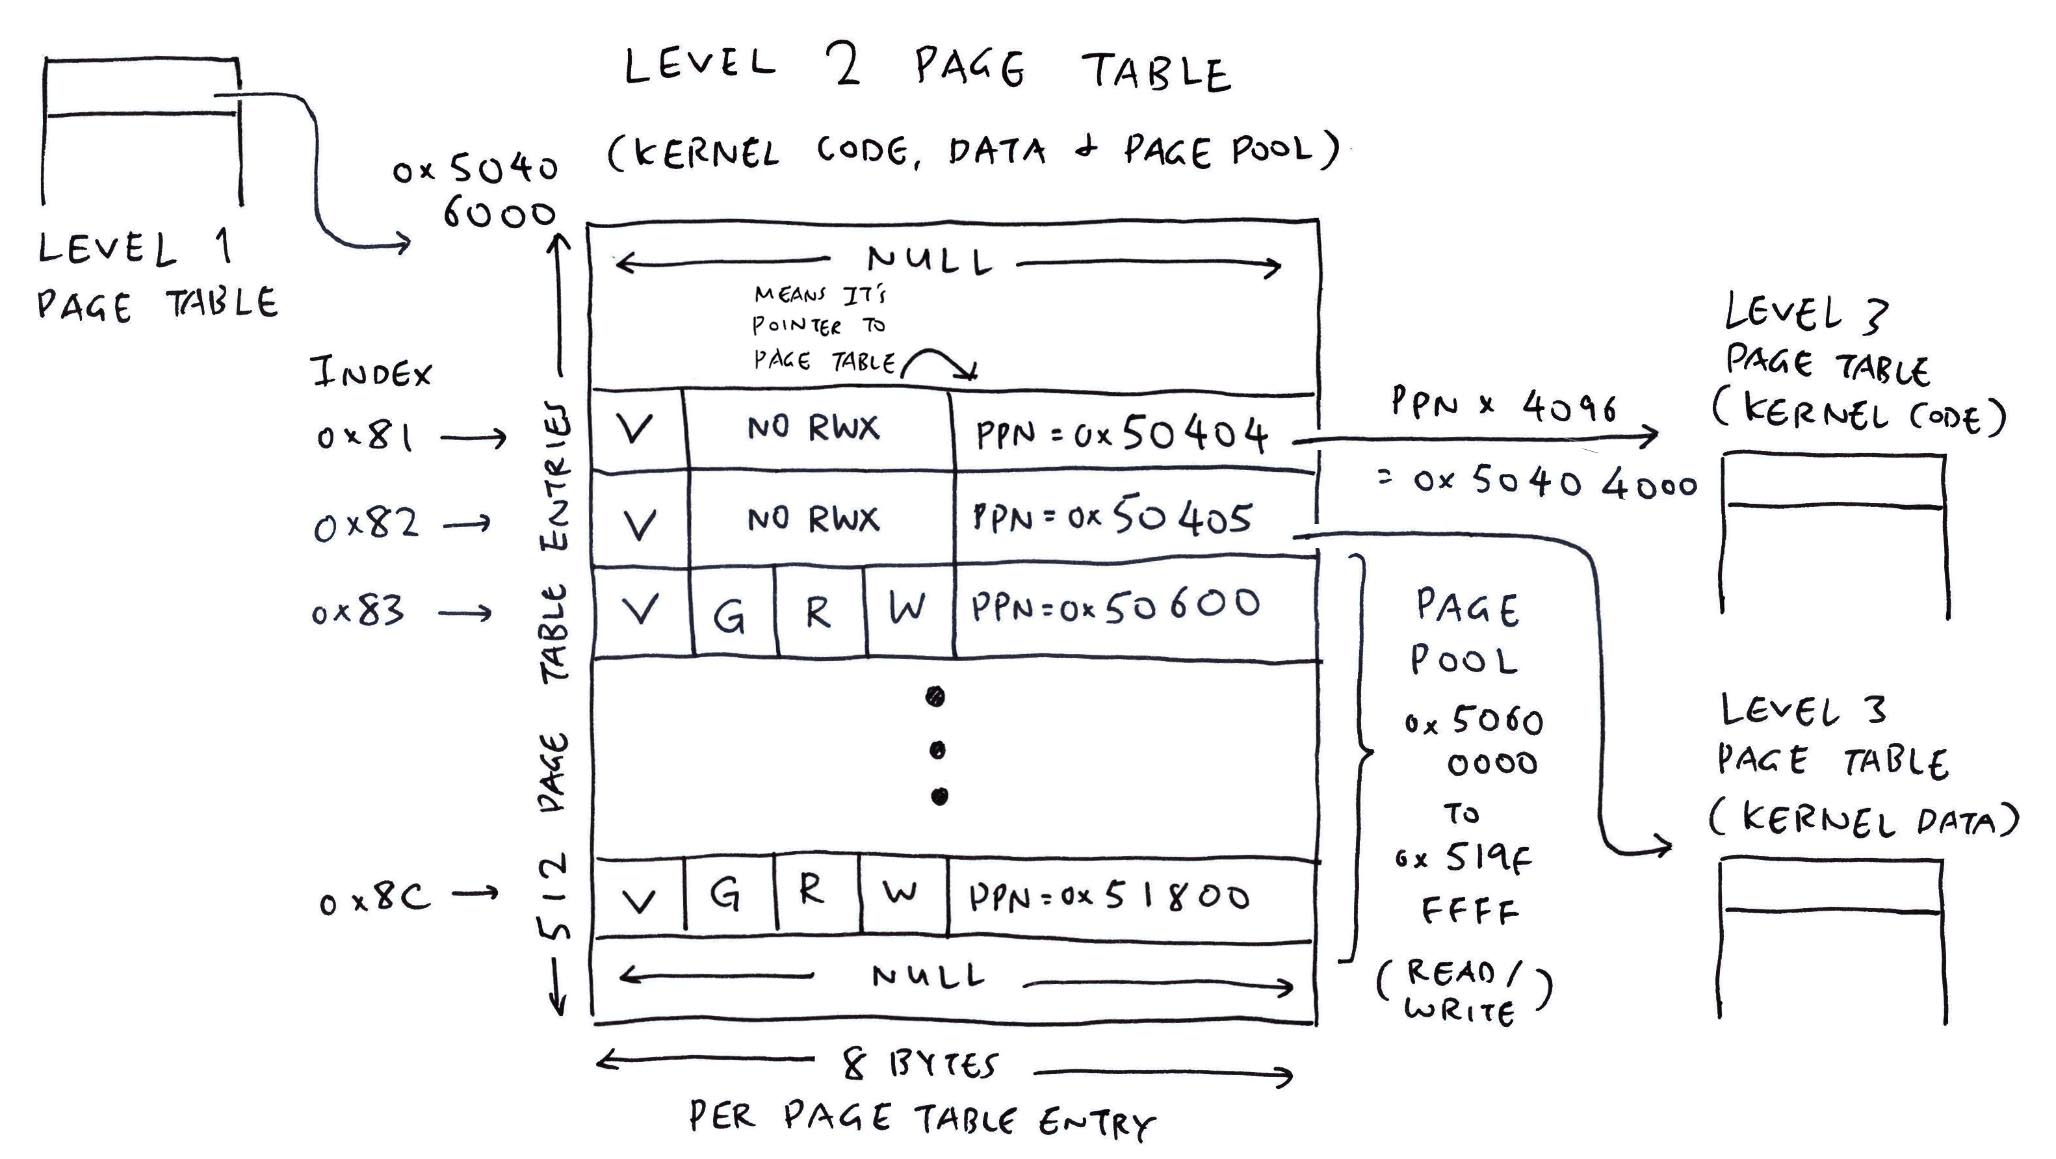 Level 2 Page Table for Kernel